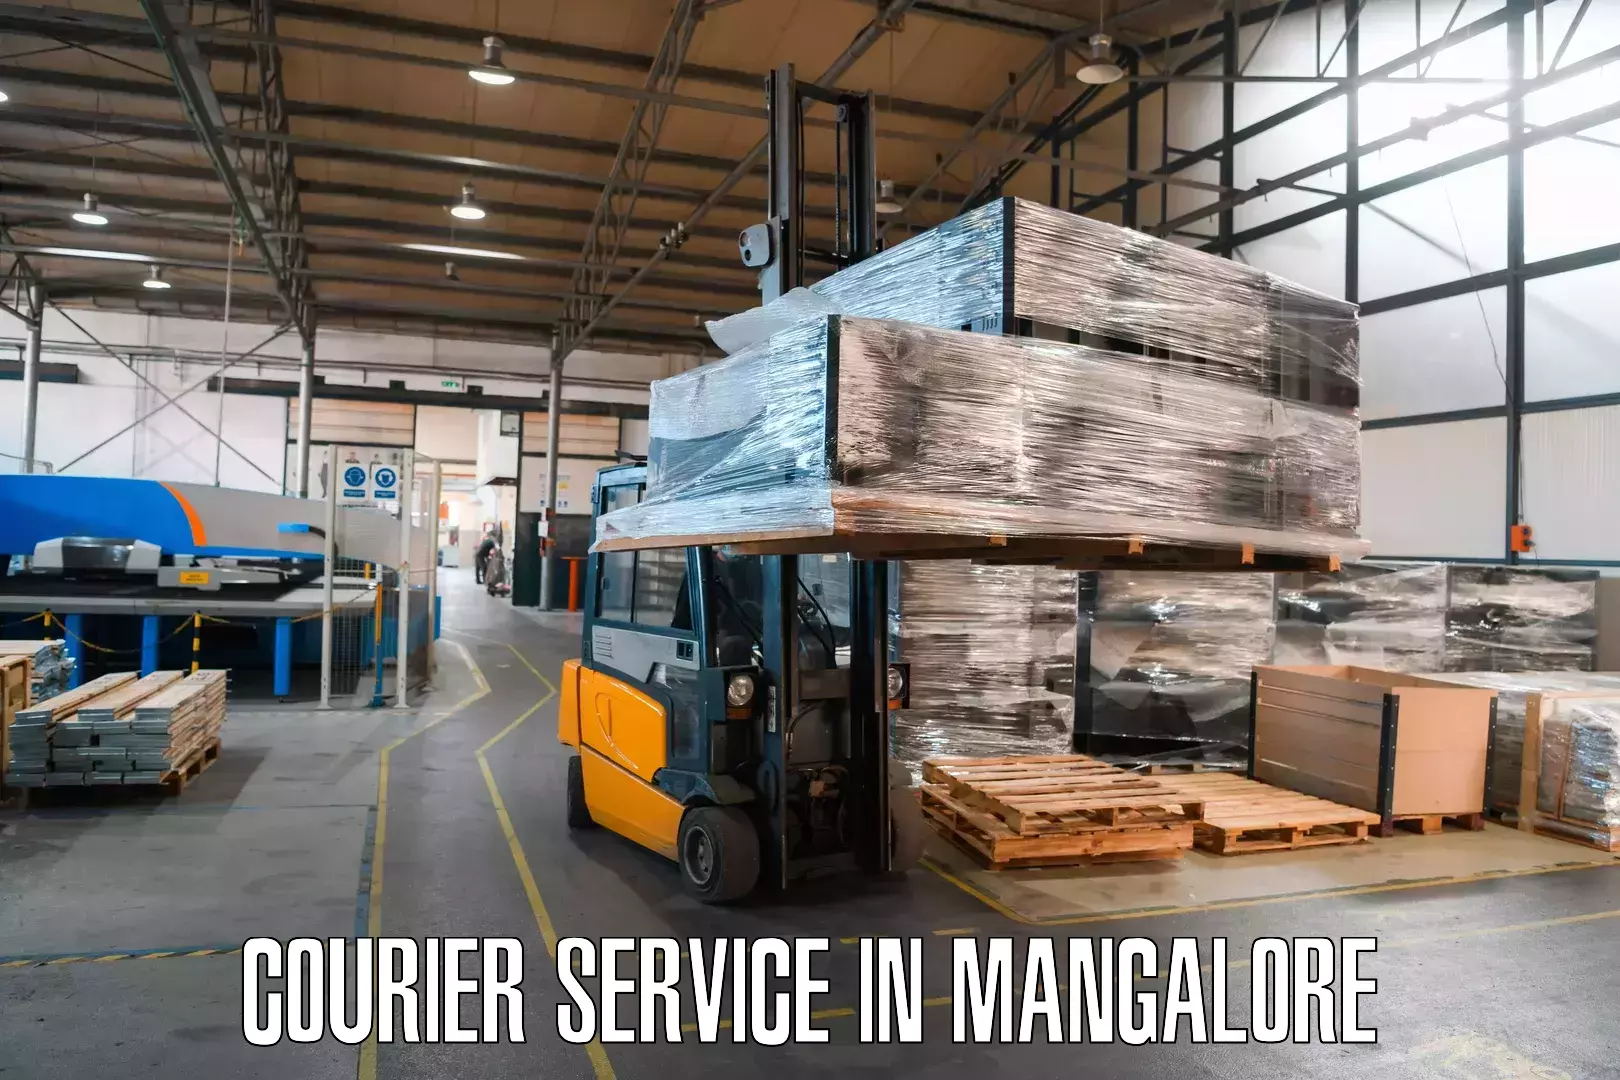 Multi-national courier services in Mangalore